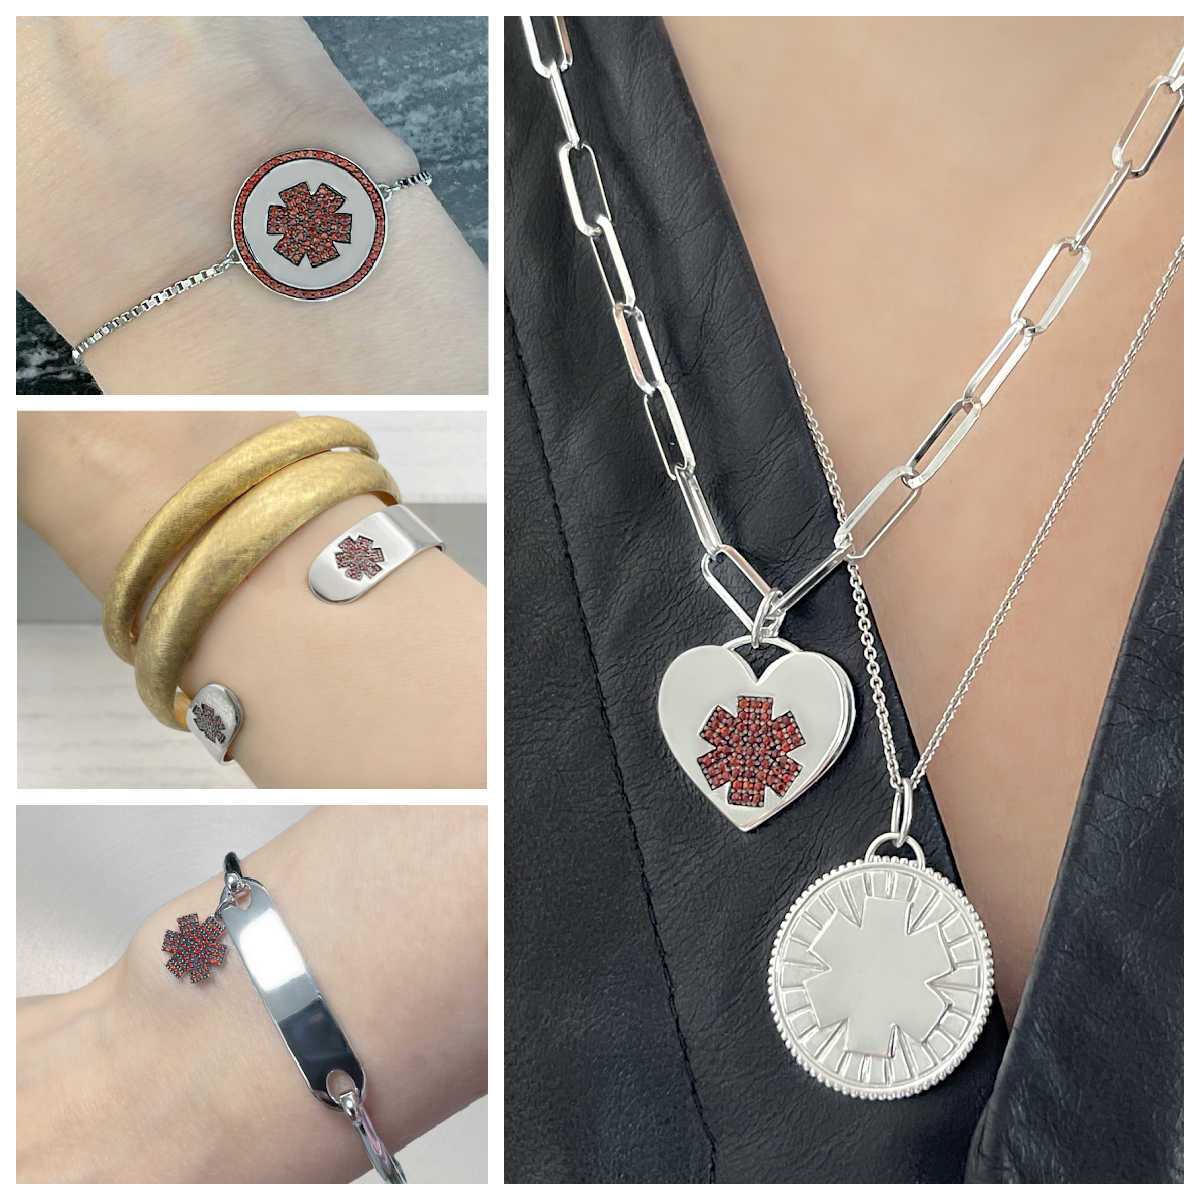 Sterling Silver & Garnet Medical Alert Jewelry | Engraved Medical IDs for Women | CHARMED Medical Jewelry